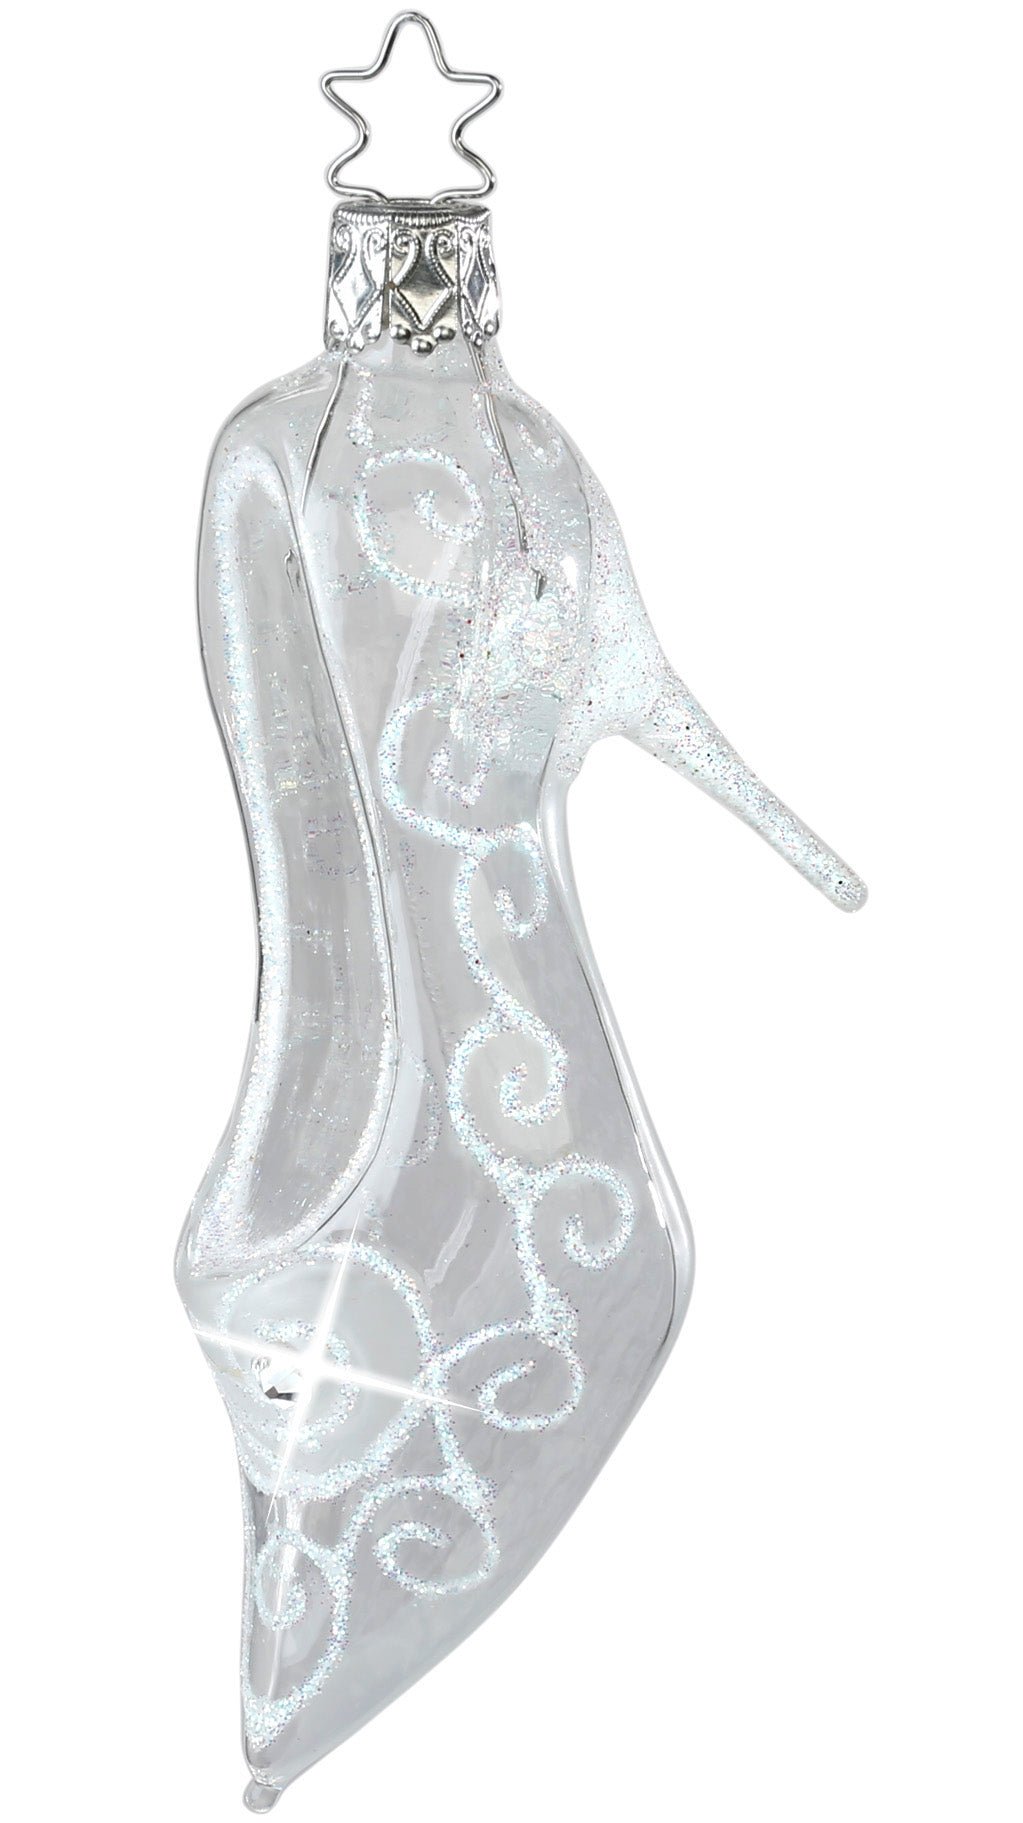 What's Your Glass Slipper?